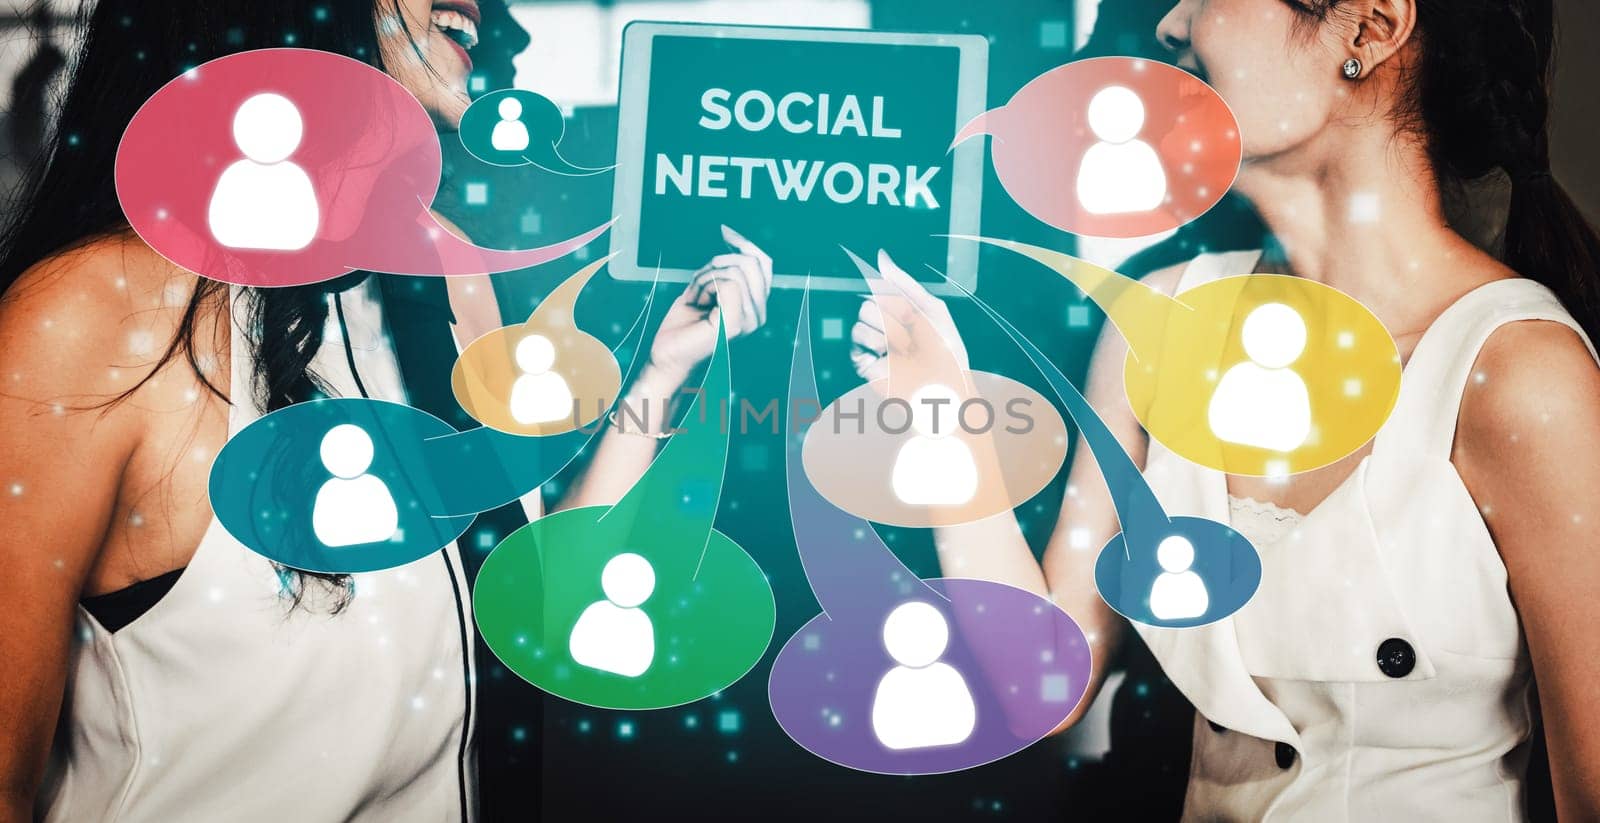 Social media and people network technology concept uds by biancoblue